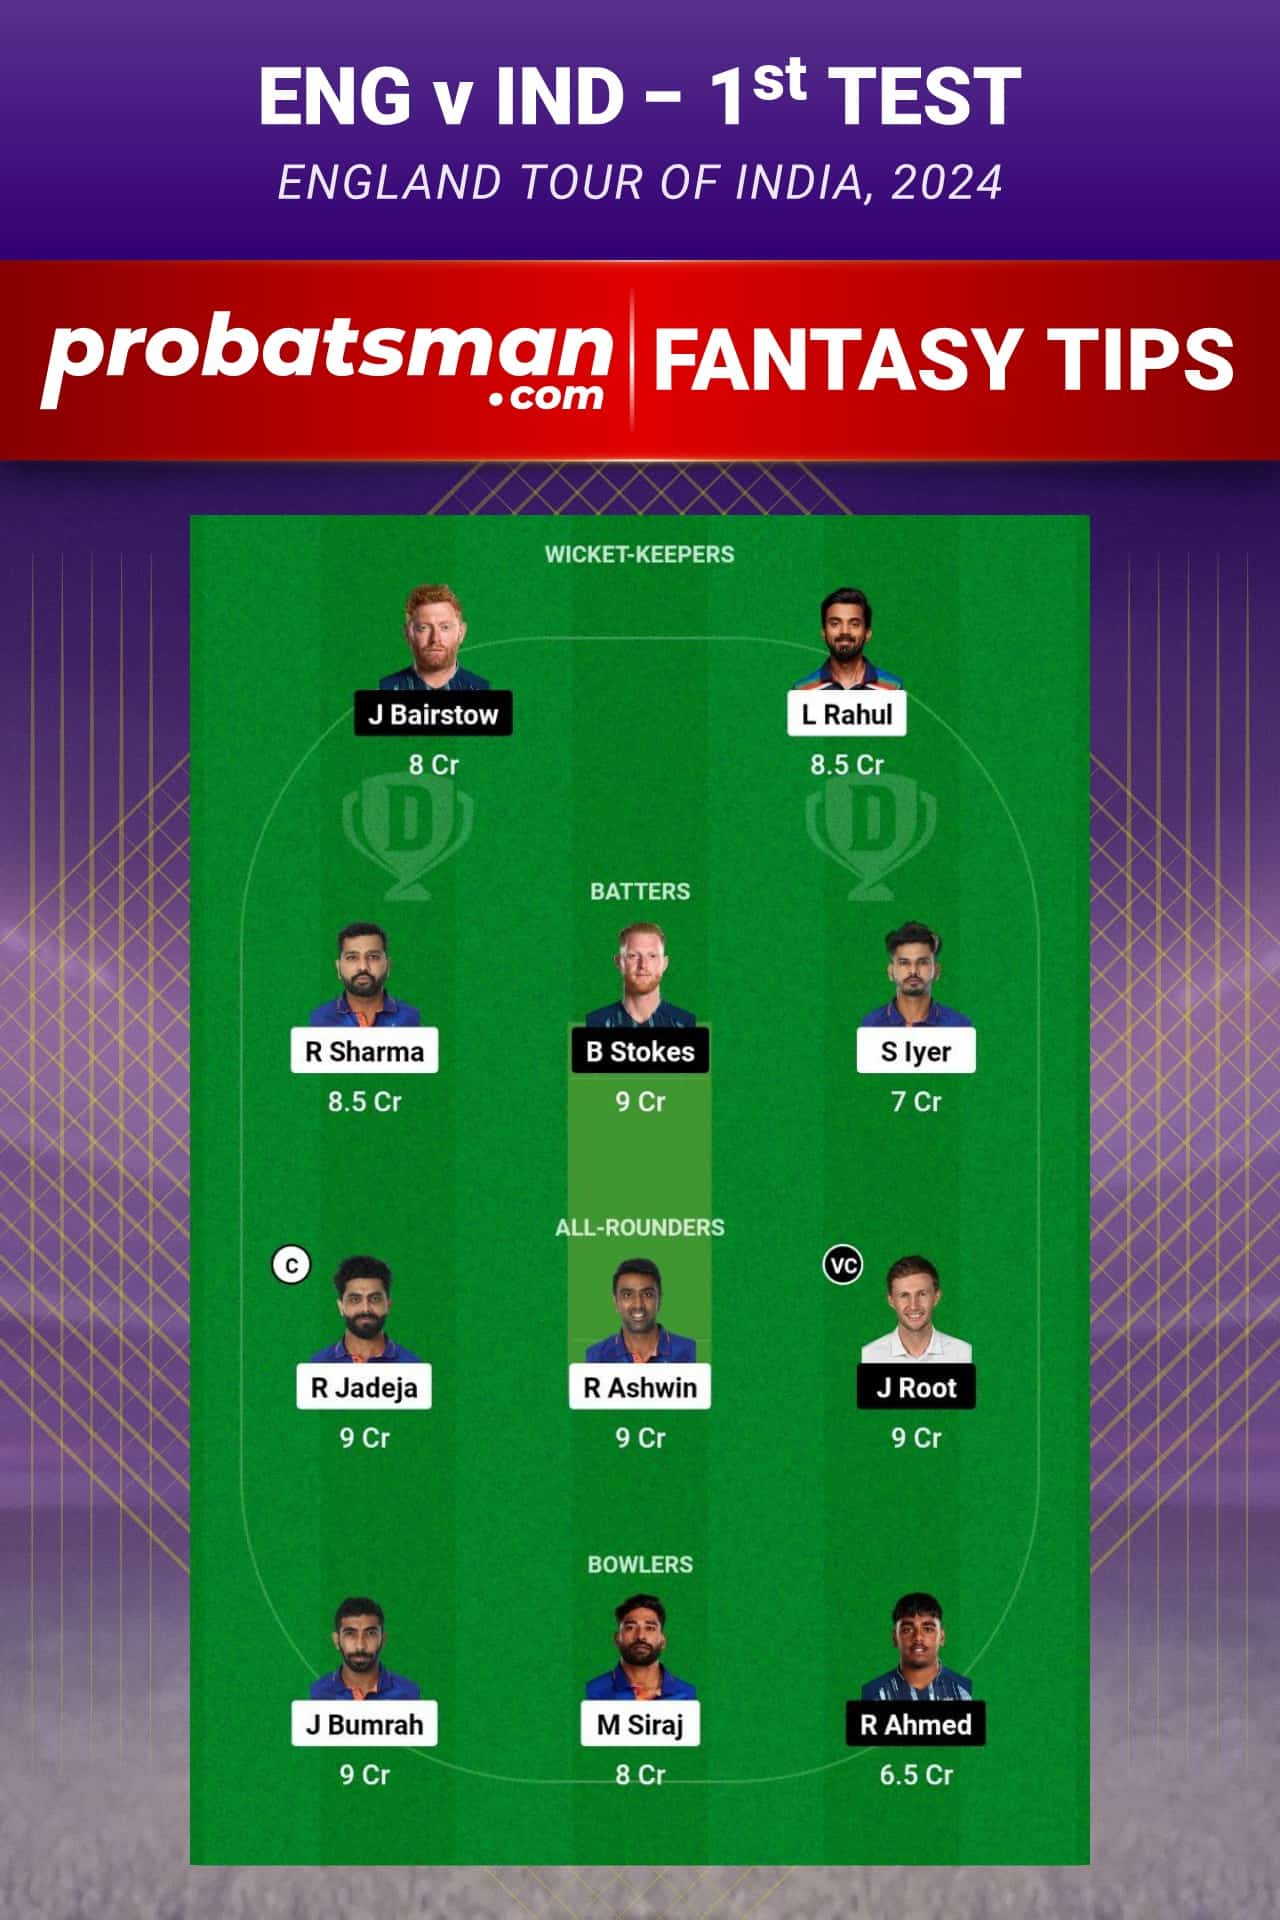 1st Test - IND vs ENG Dream11 Prediction Fantasy Team 1 - England tour of India, 2024